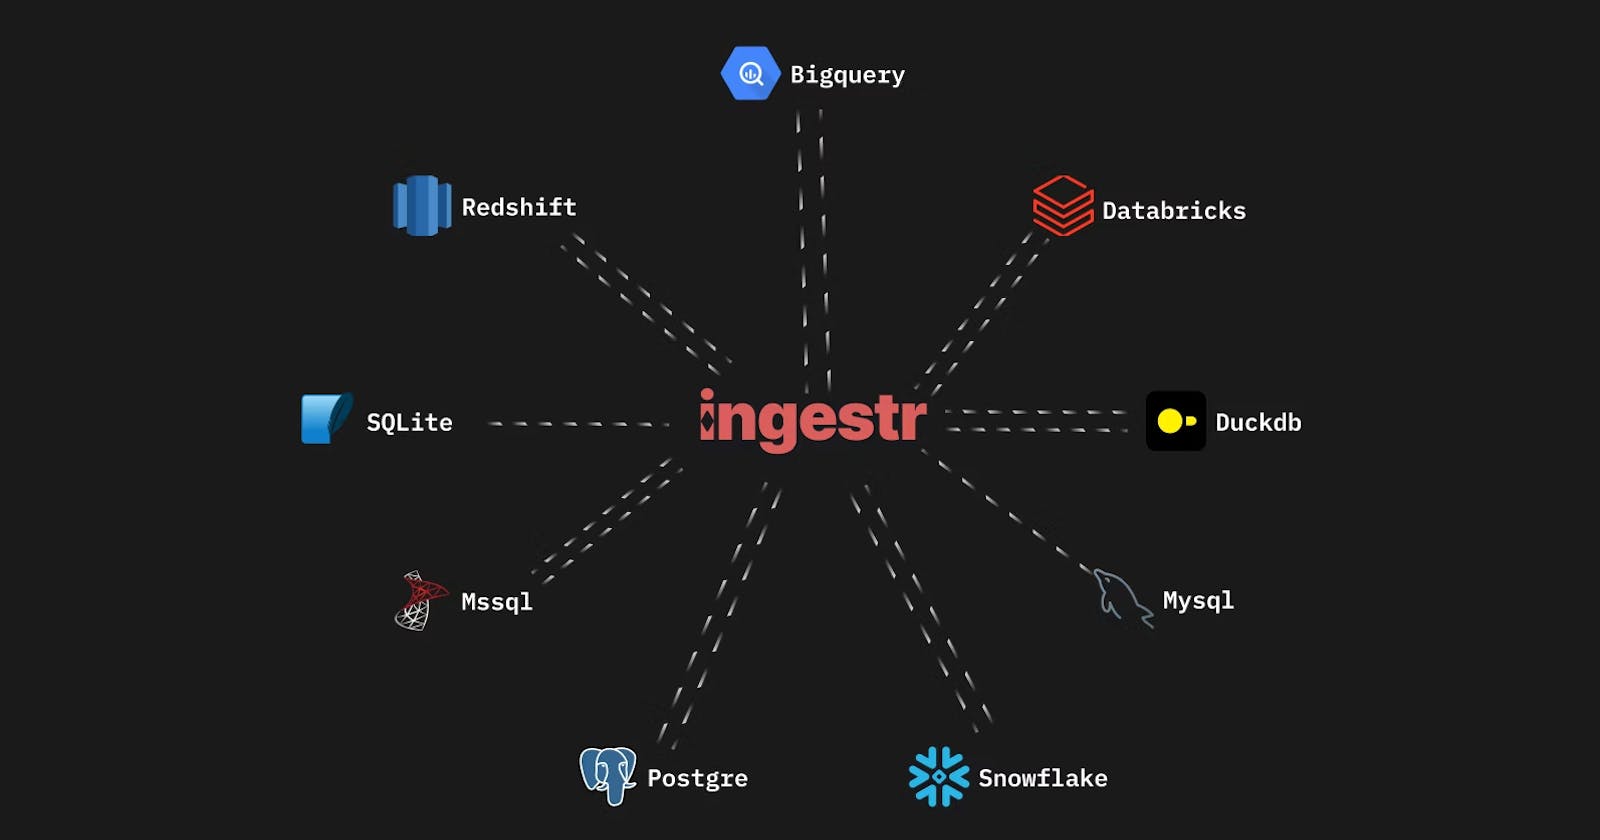 Ingester - A CLI to copy data between databases